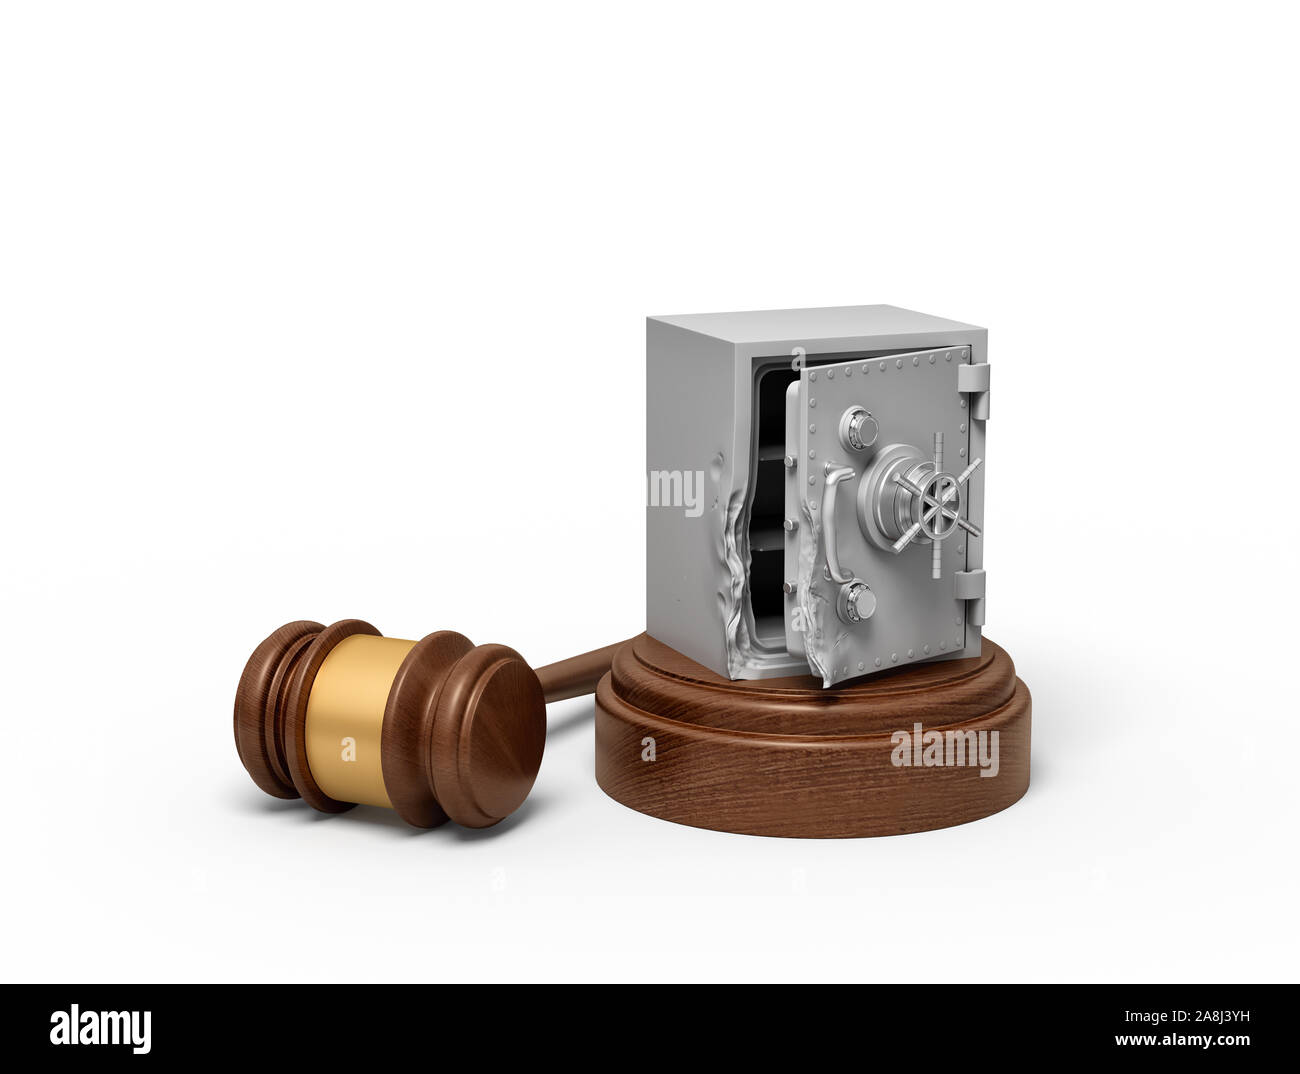 3d rendering of broken damaged metal bank safe on round wooden block and brown wooden gavel Stock Photo